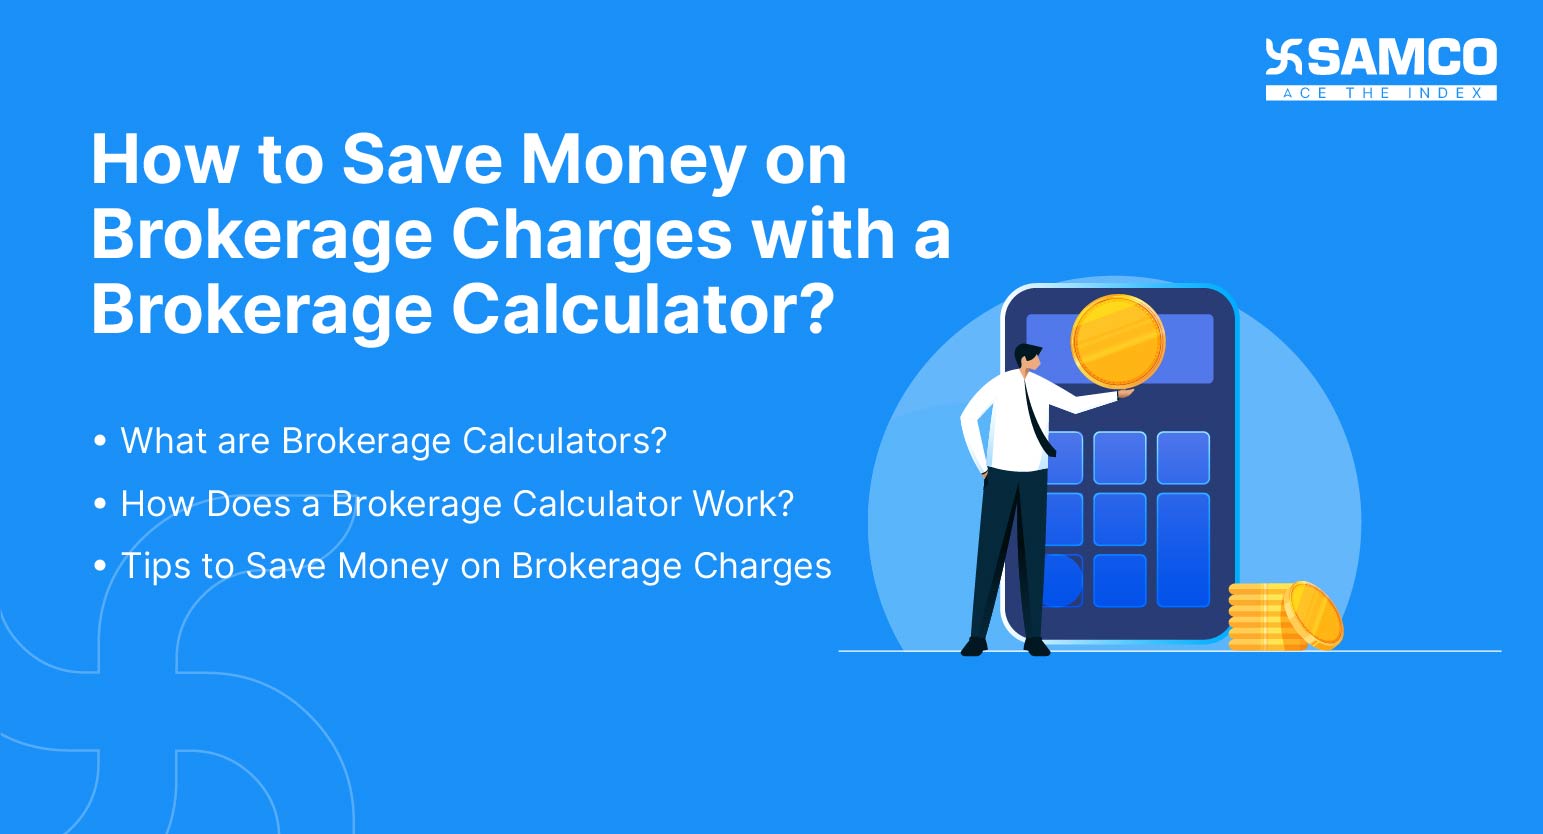 How to Save Money on Brokerage Charges with a Brokerage Calculator?